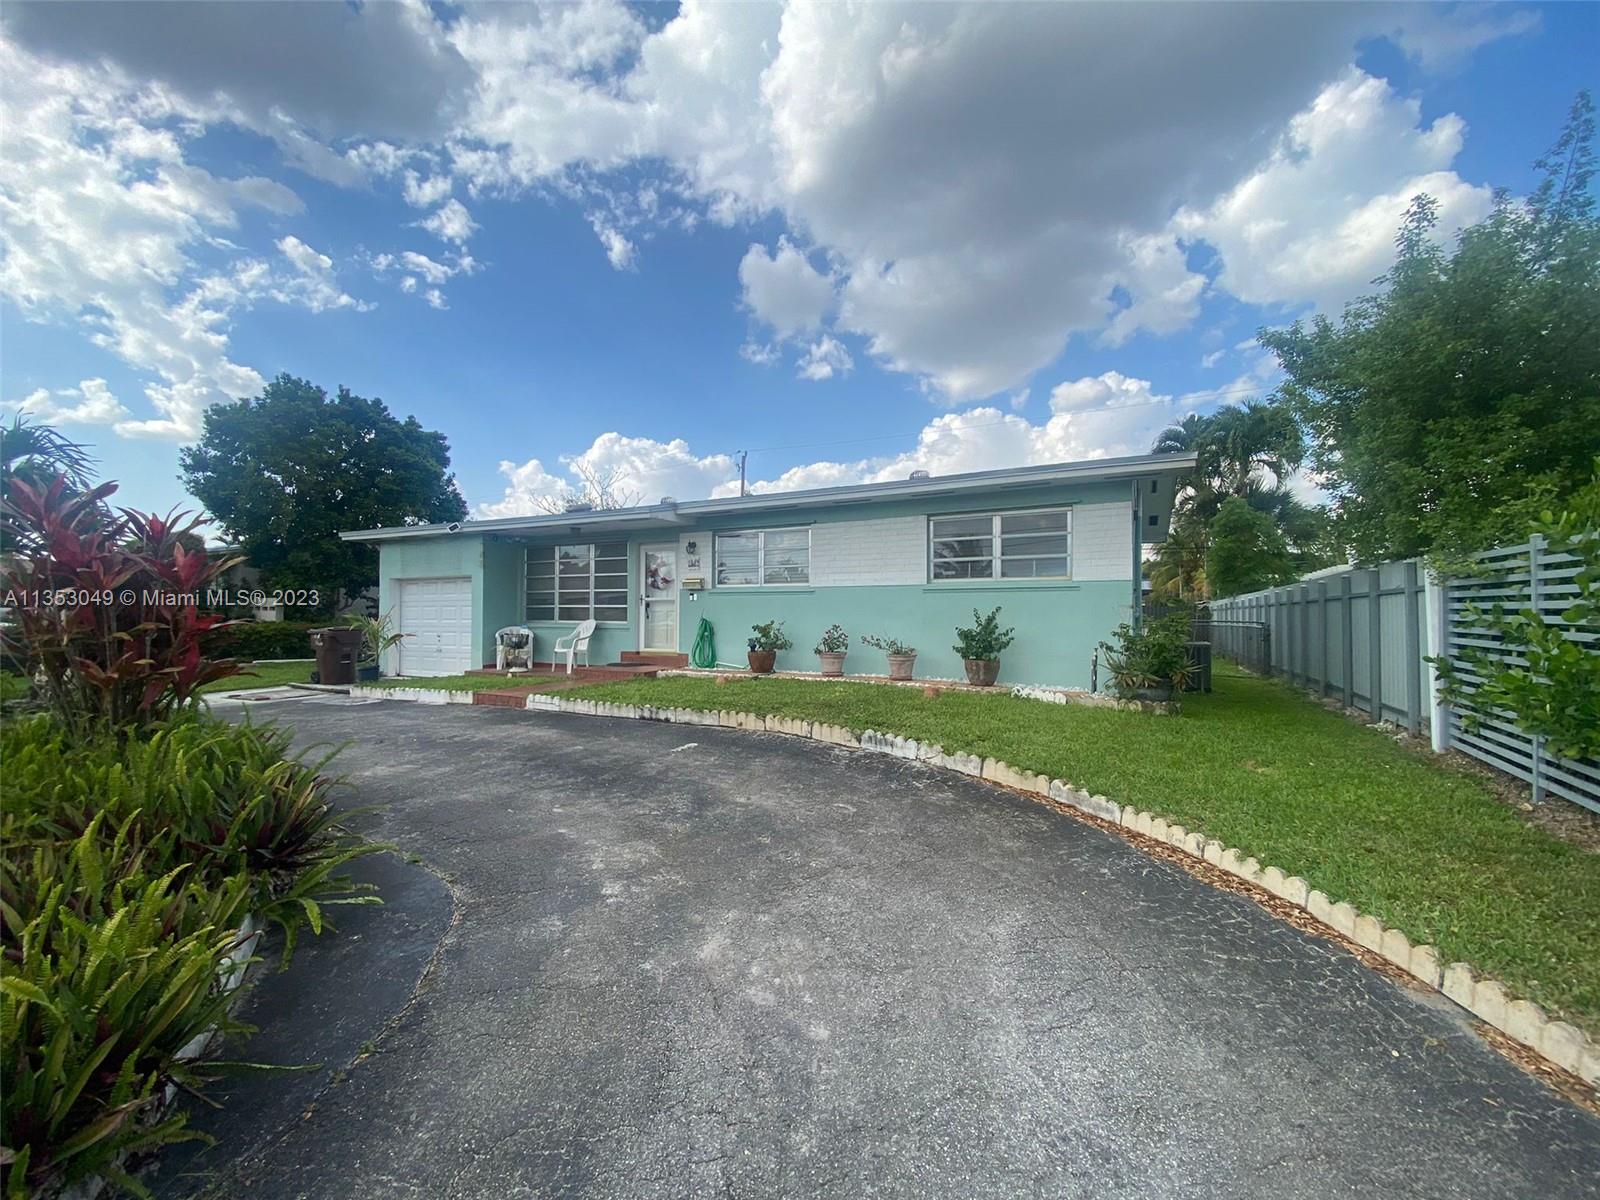 LOCATION and HUGE YARD 3 bedrooms 1 bath - 1 car garage NO HOA !!! Do not let this opportunity pass you by - so much room to grow and close to everything in Hialeah (walk to shops on 49 street) but also on a VERY quiet and secluded street. (ROOF done in 2021 and AC in 2017 huge saving!!!)